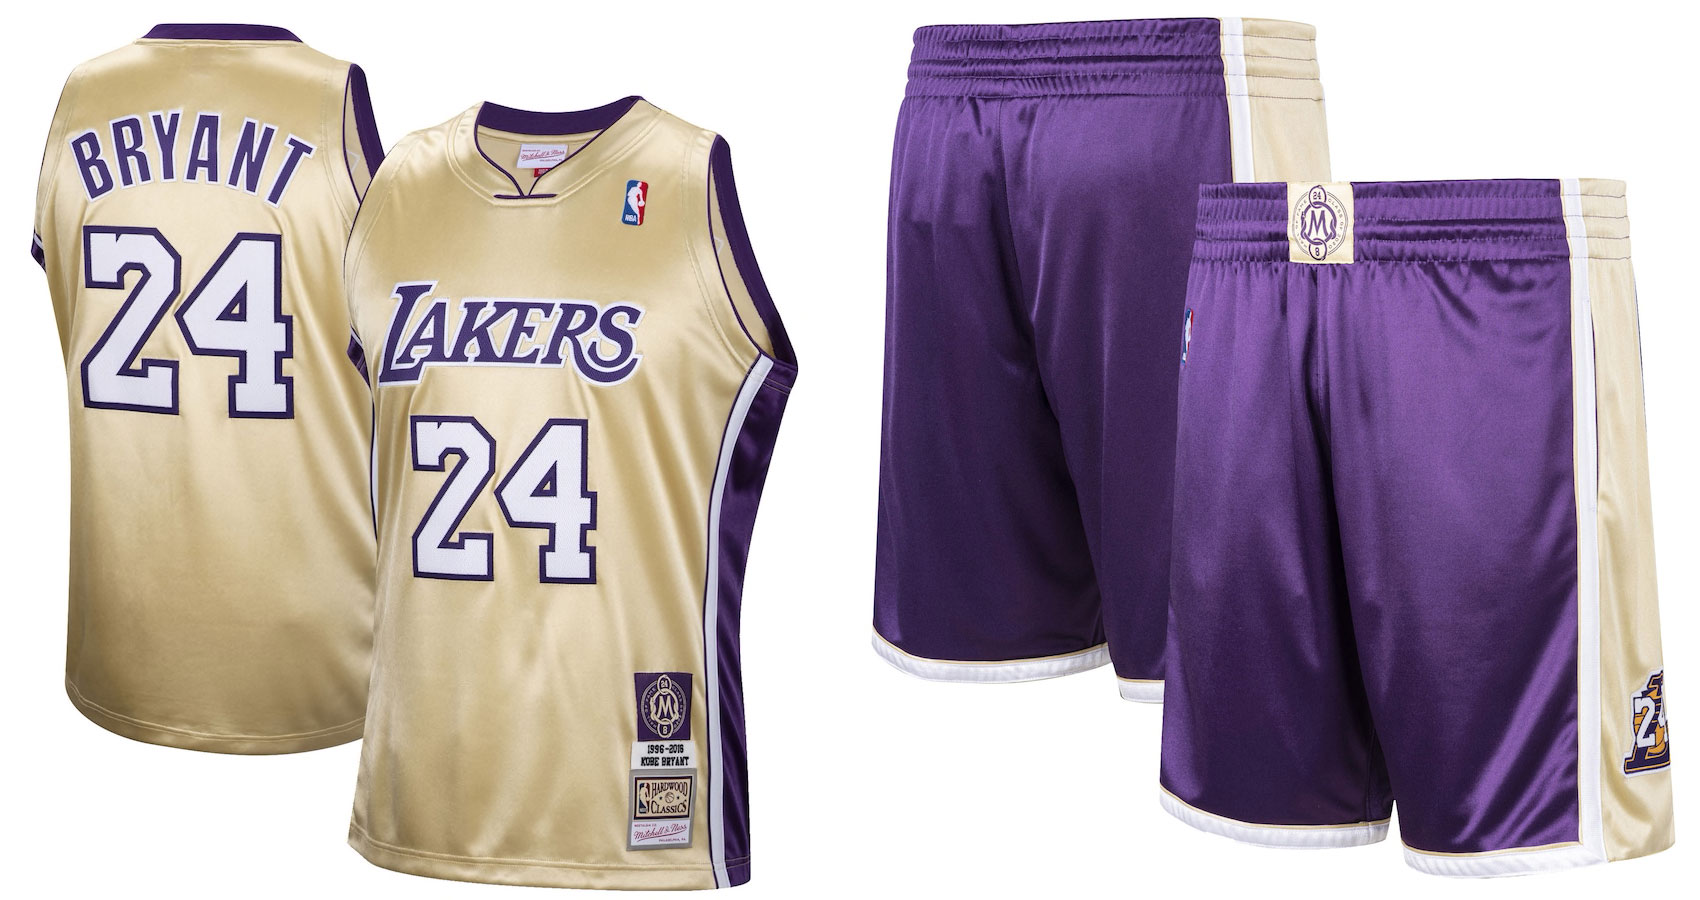 Kobe Bryant Lakers Hall of Fame Jerseys and Shorts | SneakerFits.com